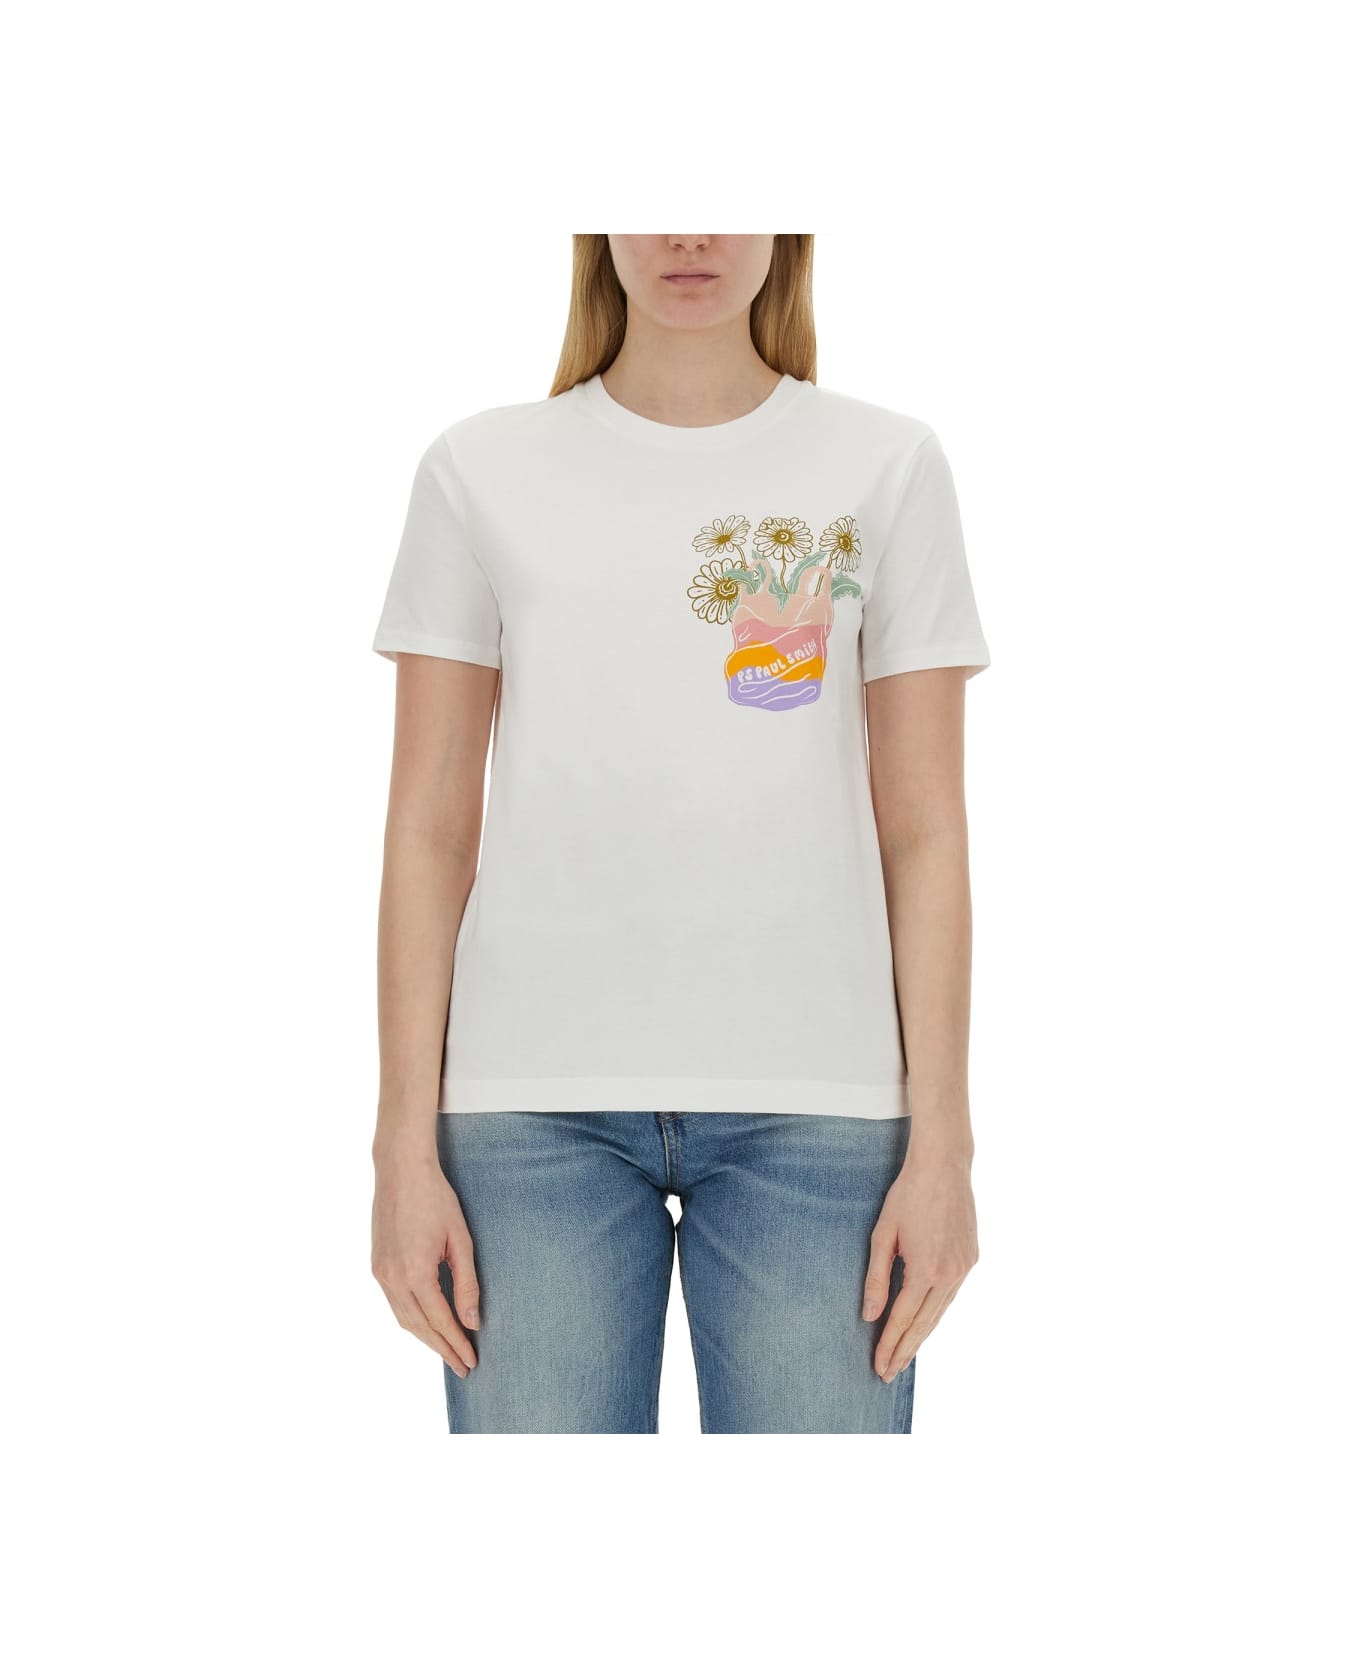 PS by Paul Smith Daisy T-shirt - WHITE